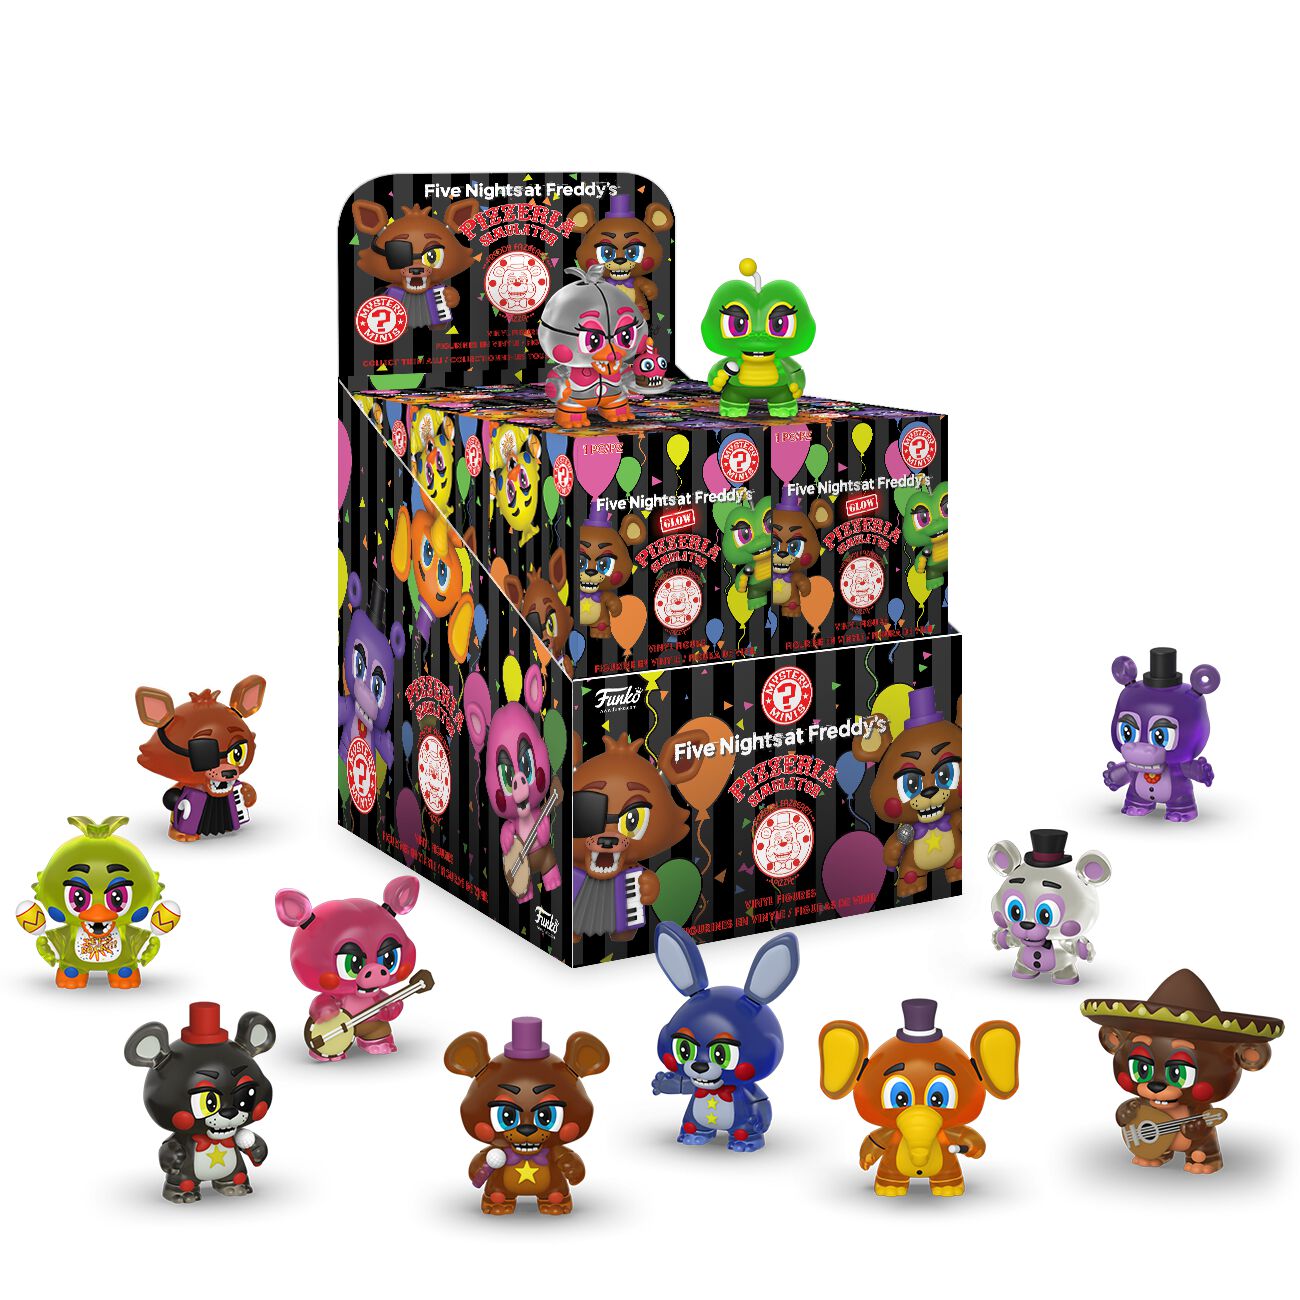 Coming Soon! Five Nights at Freddy's Pizza Simulator Glow Mystery Minis!